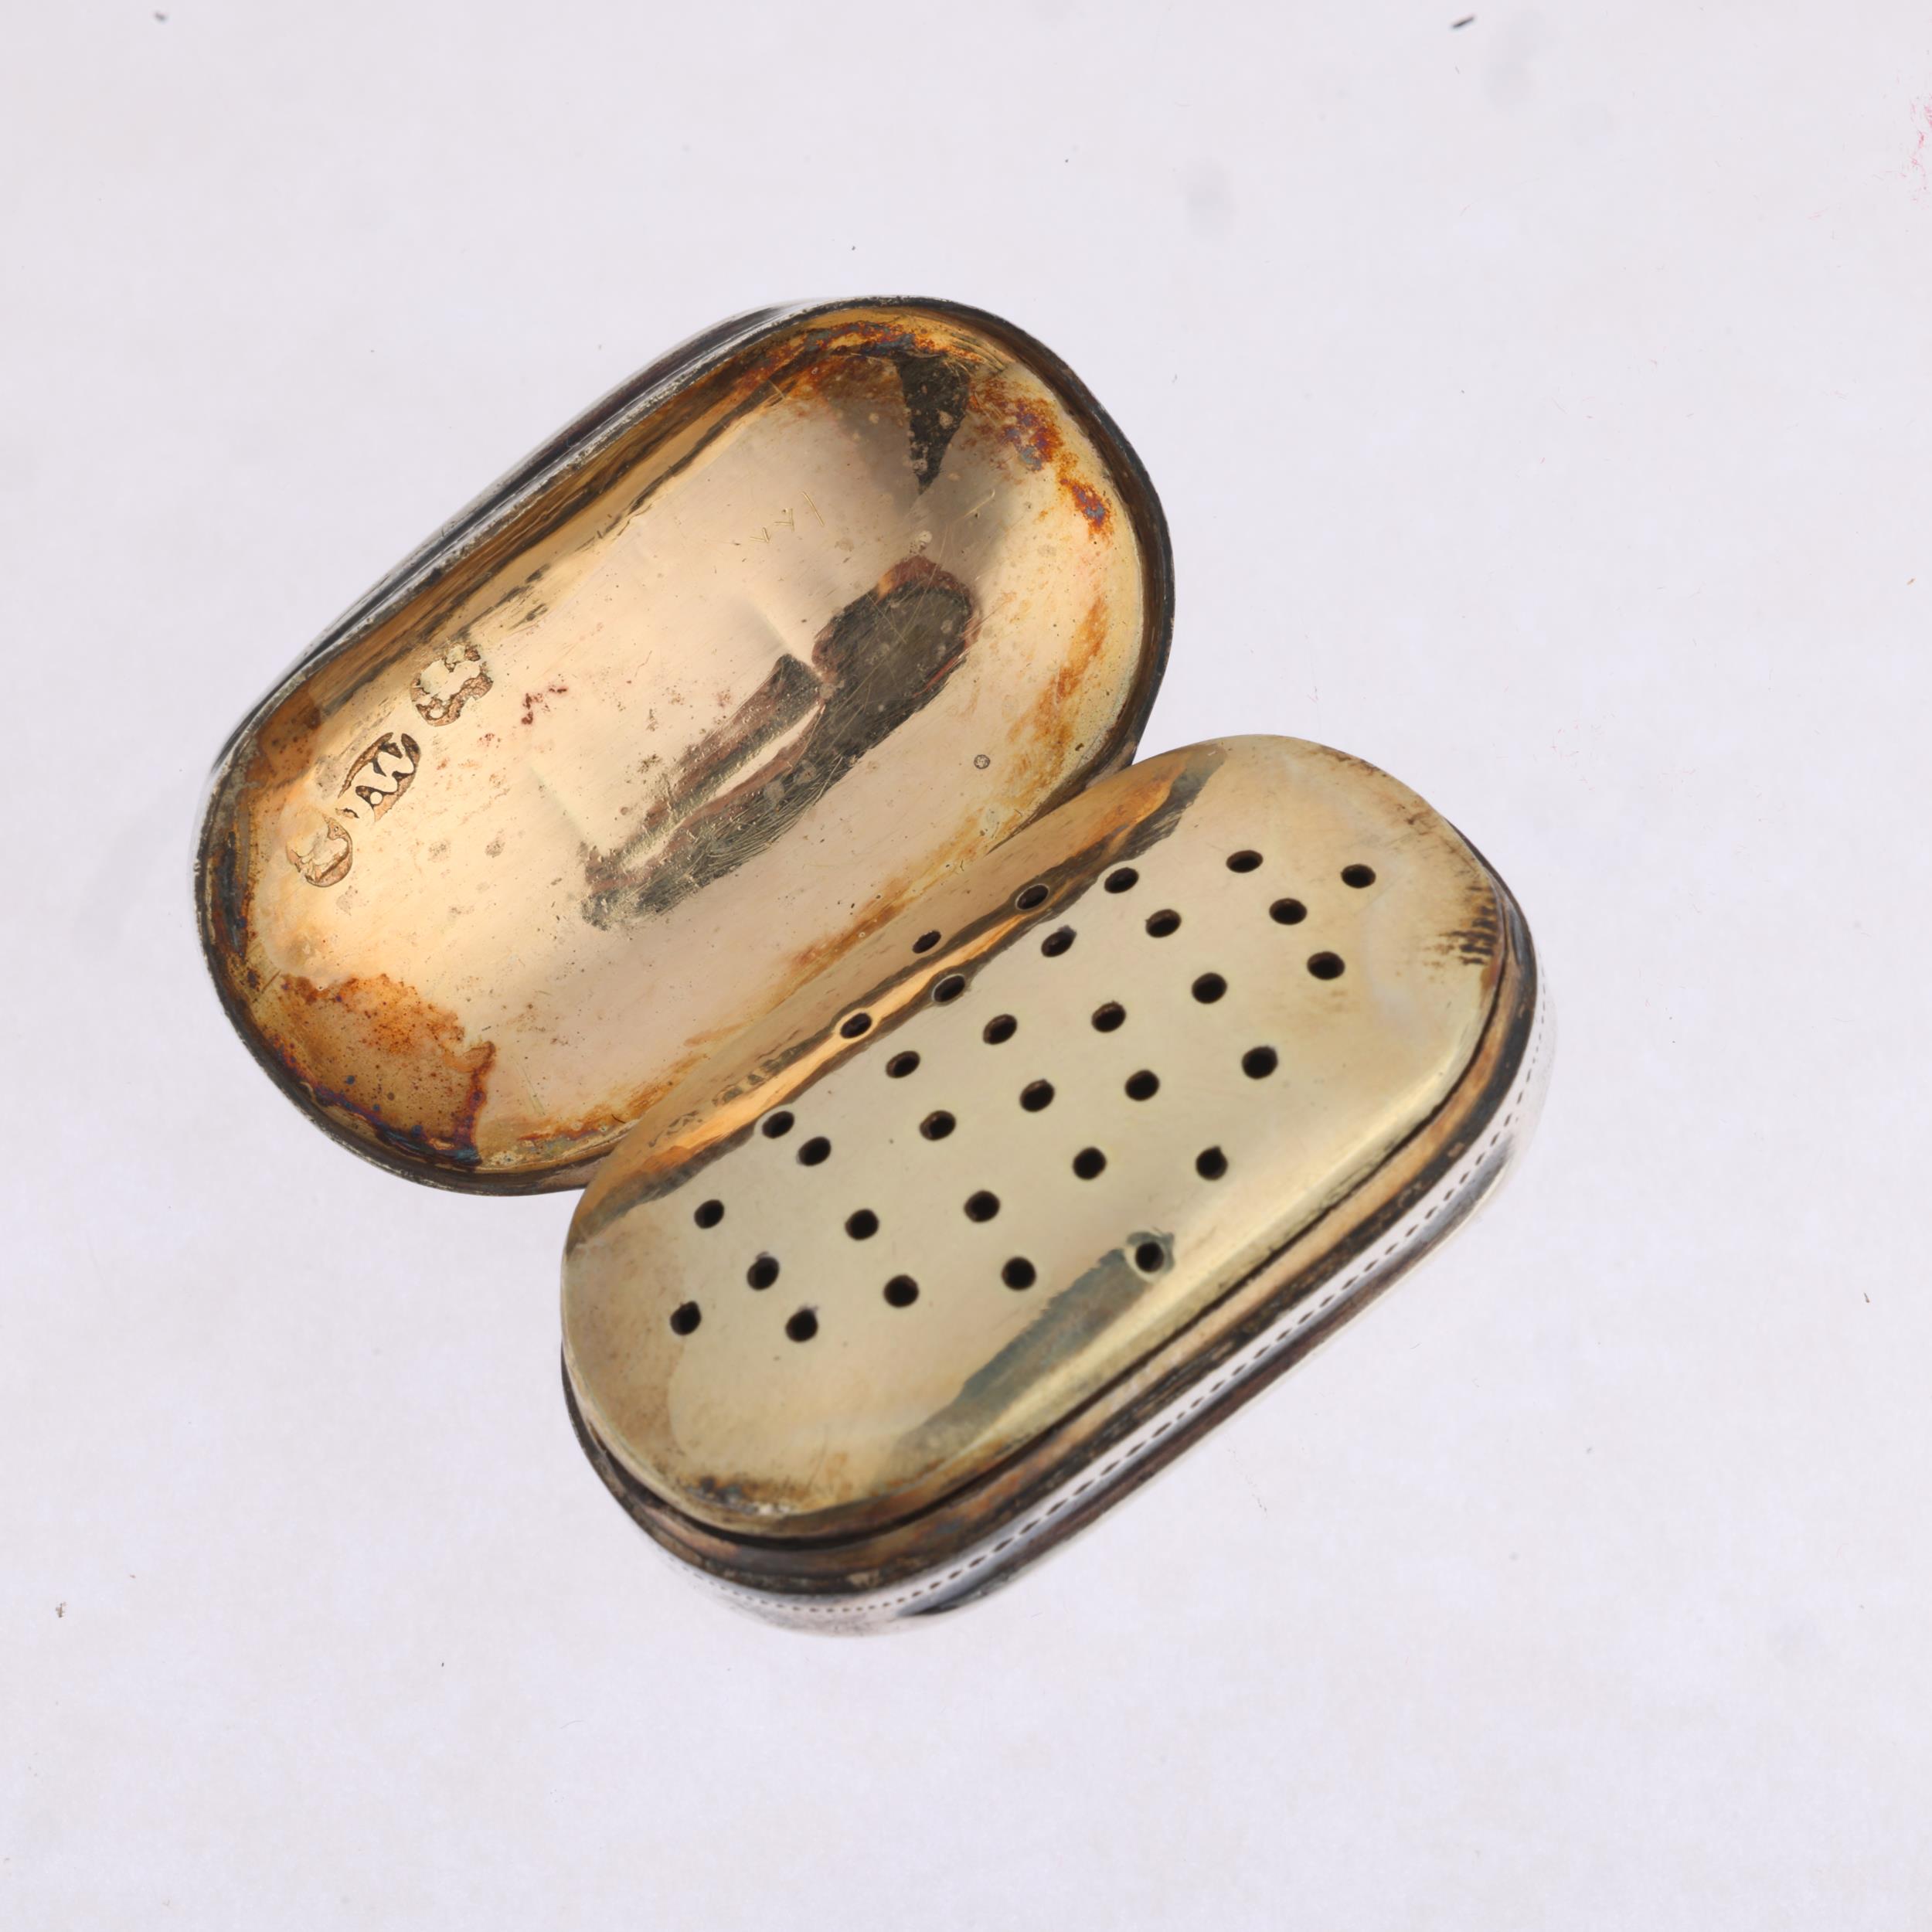 A George III silver vinaigrette, Joseph Willmore, Birmingham 1818, oval form with bright-cut - Image 3 of 3